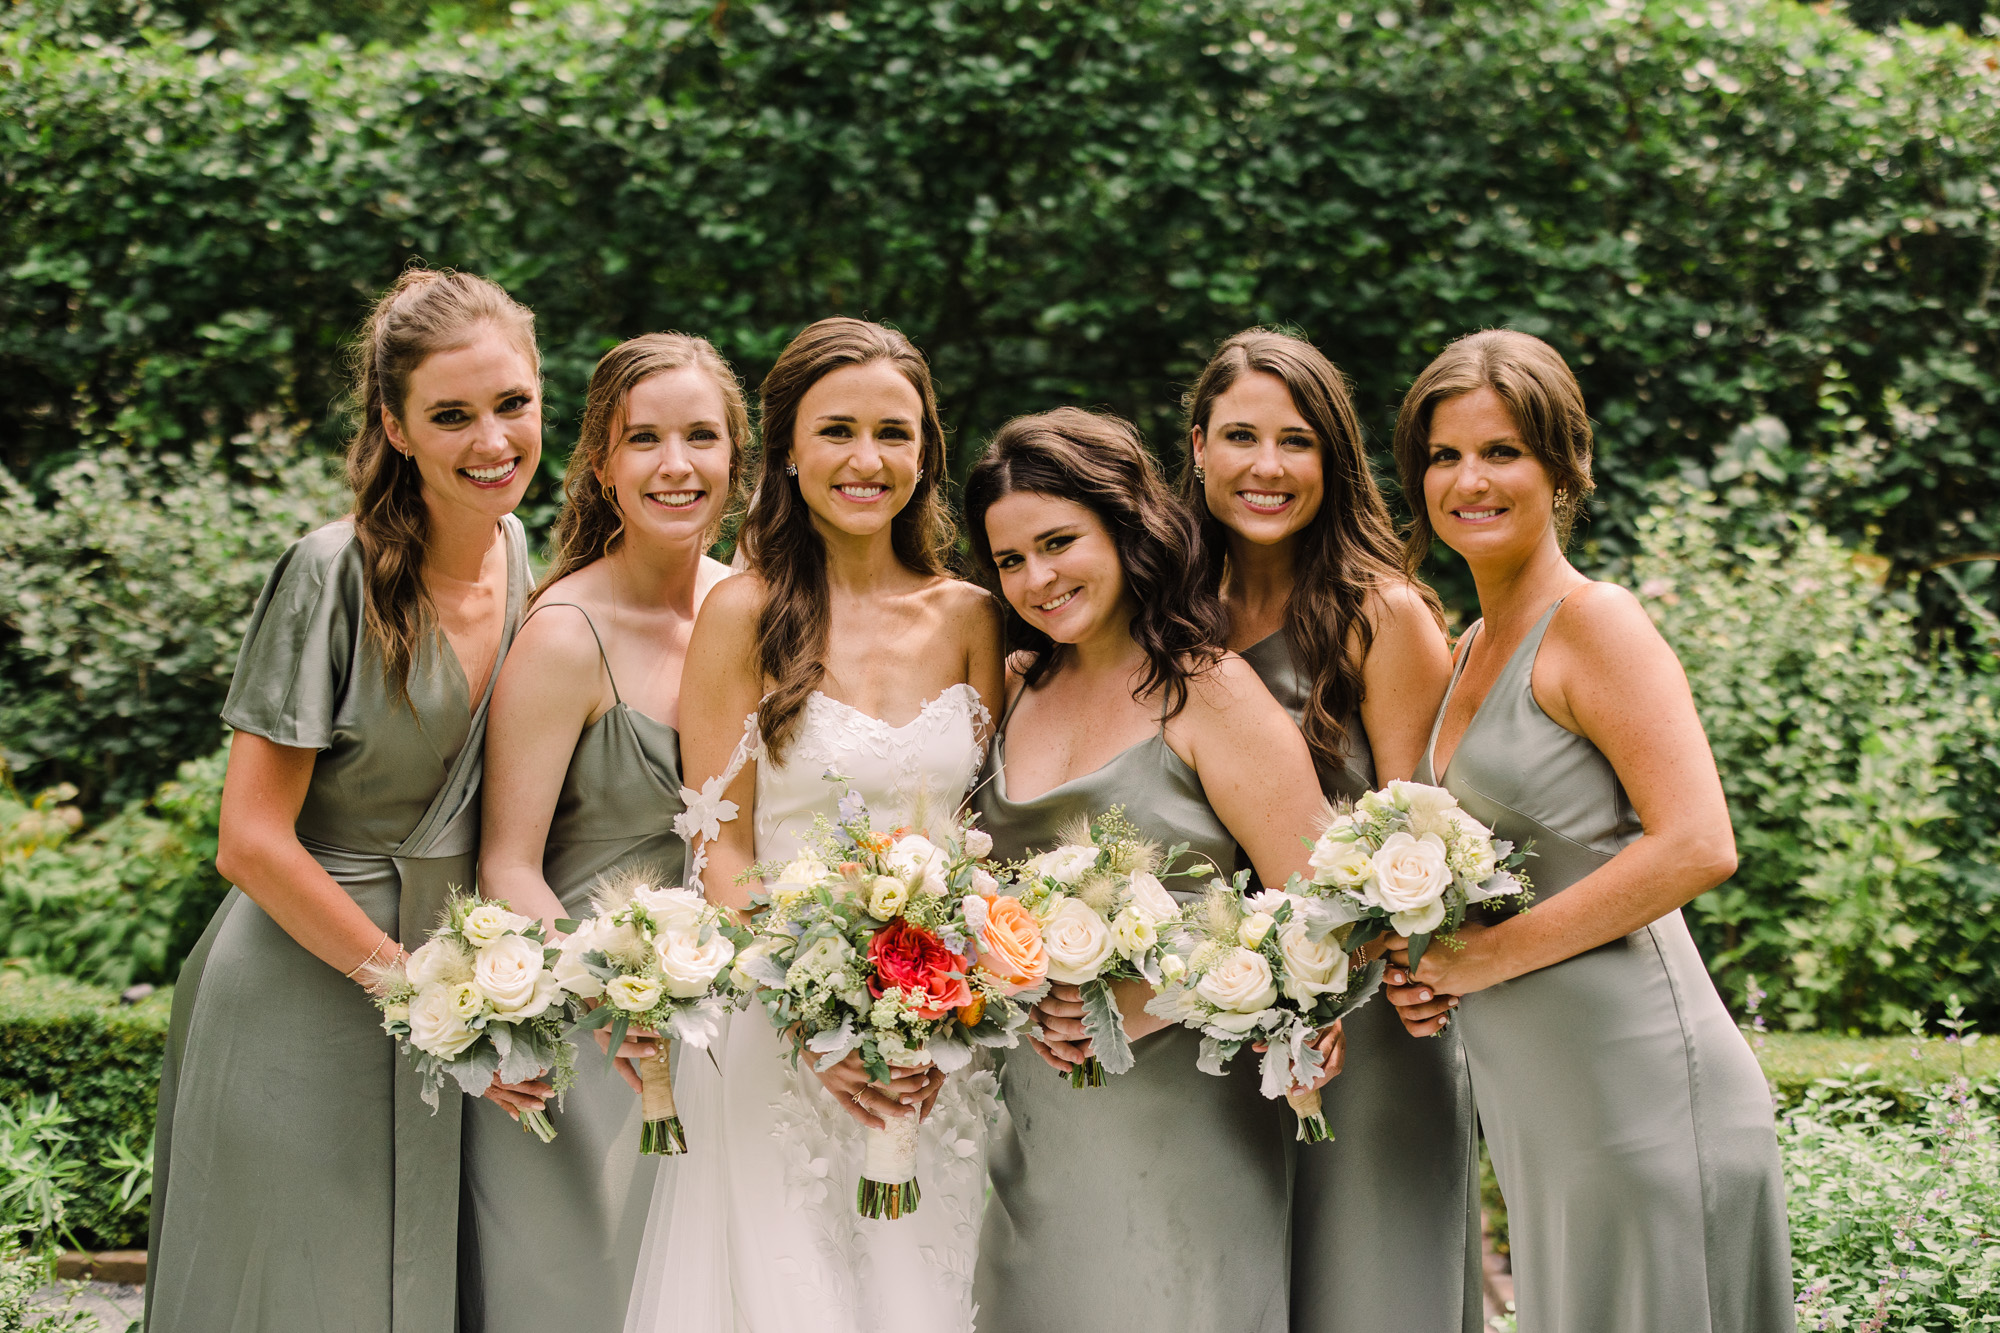 Bridesmaids in satin olive green gowns.